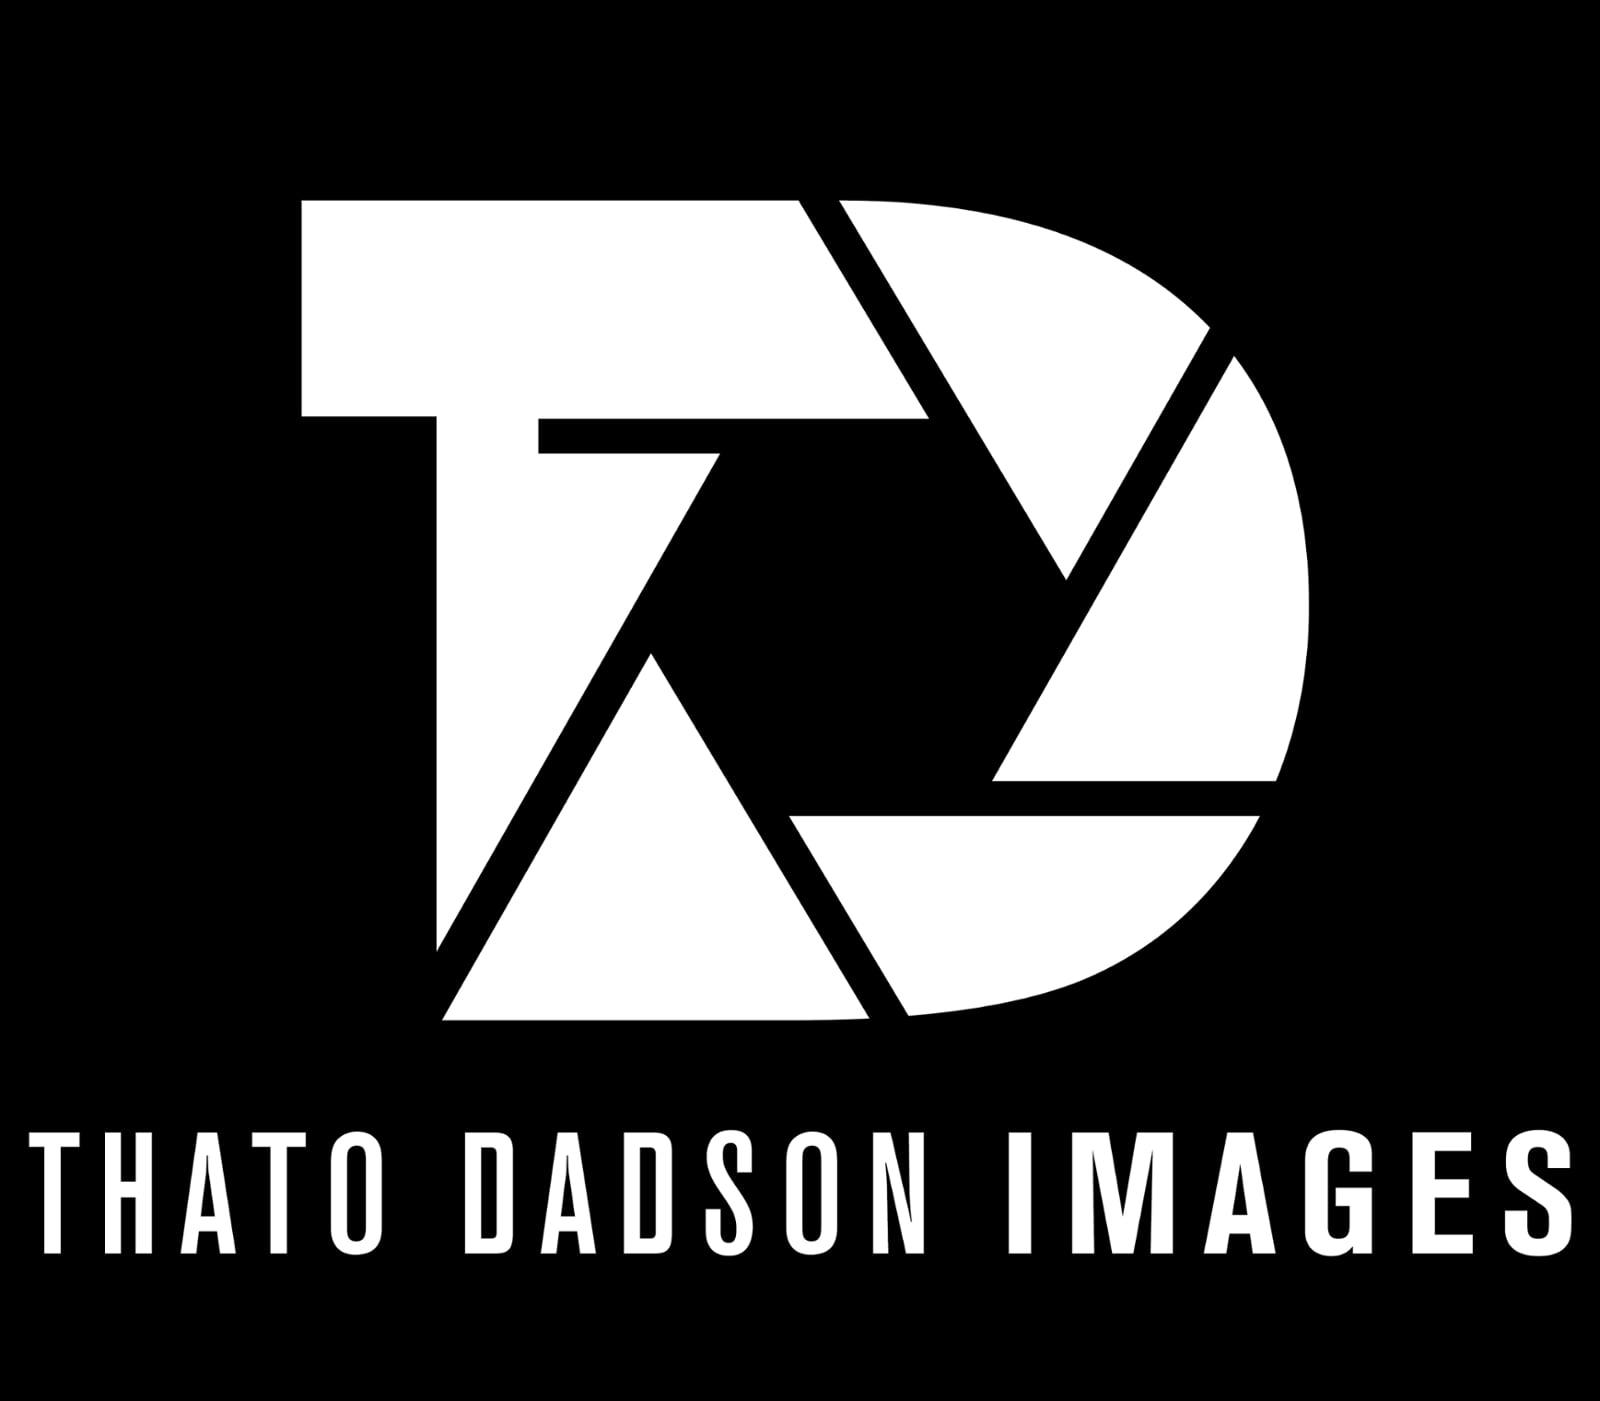 Thato Dadson Images